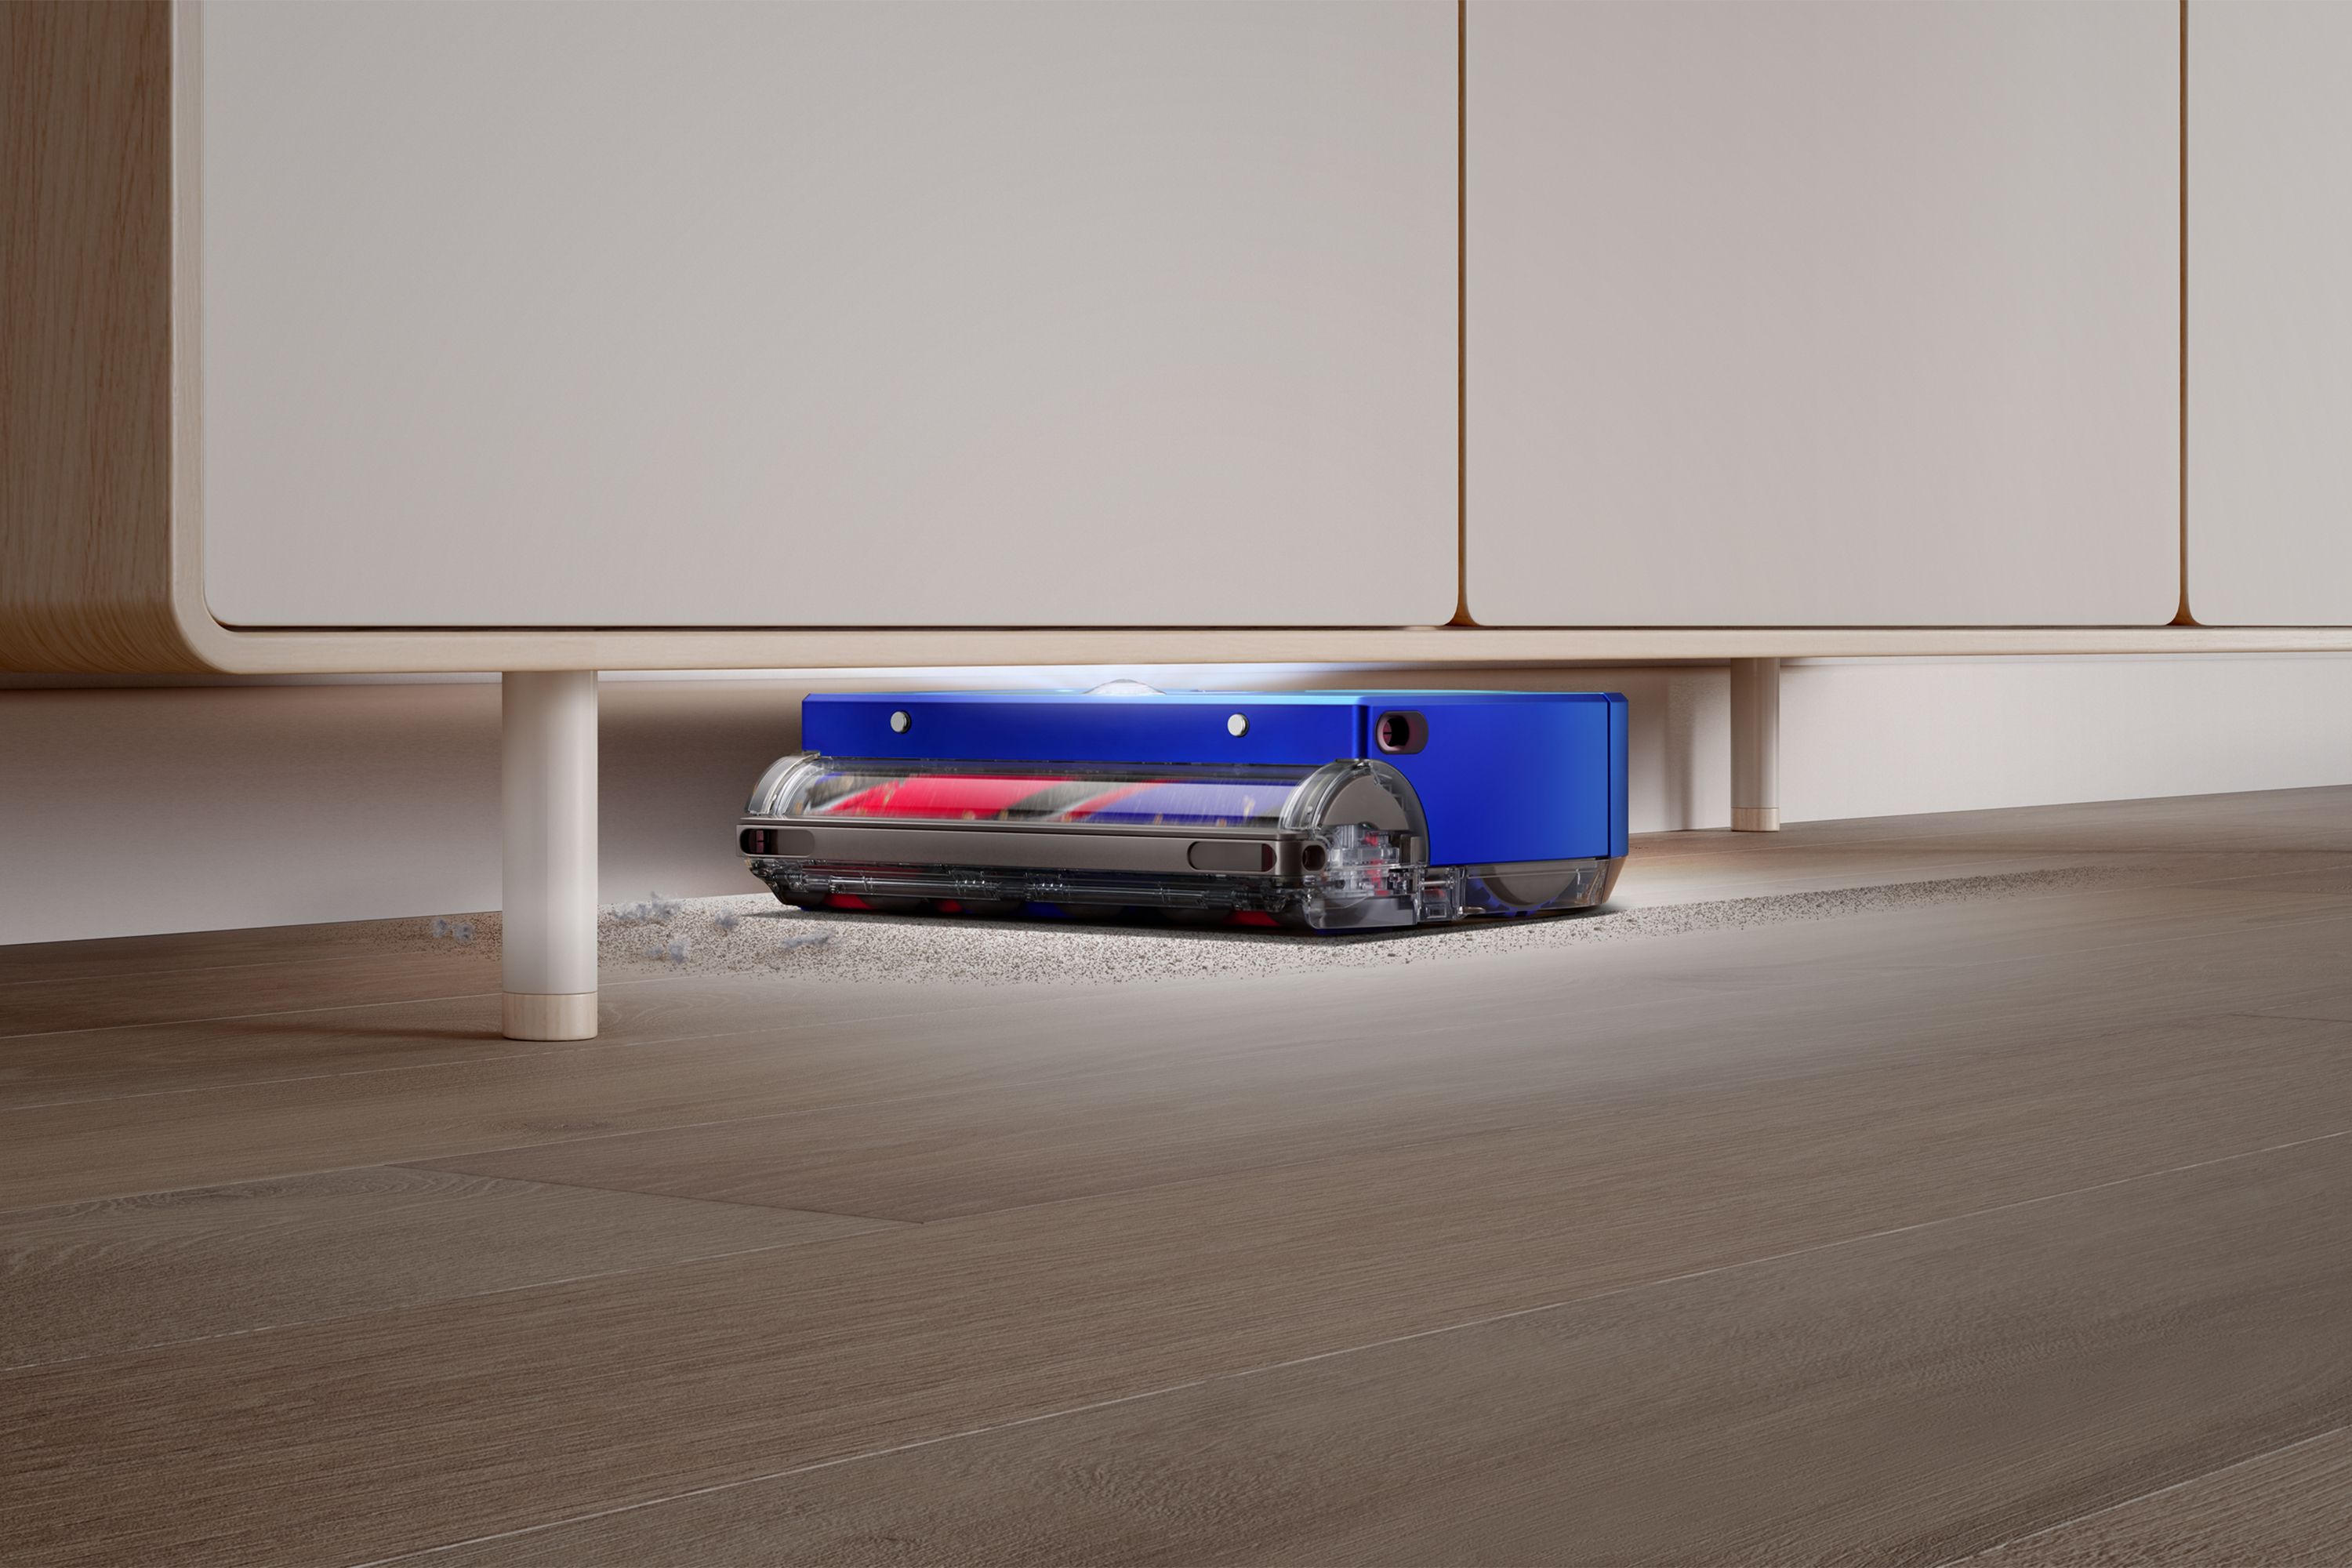 Does Dyson a Roomba? Say to the Dyson 360 Vis Nav